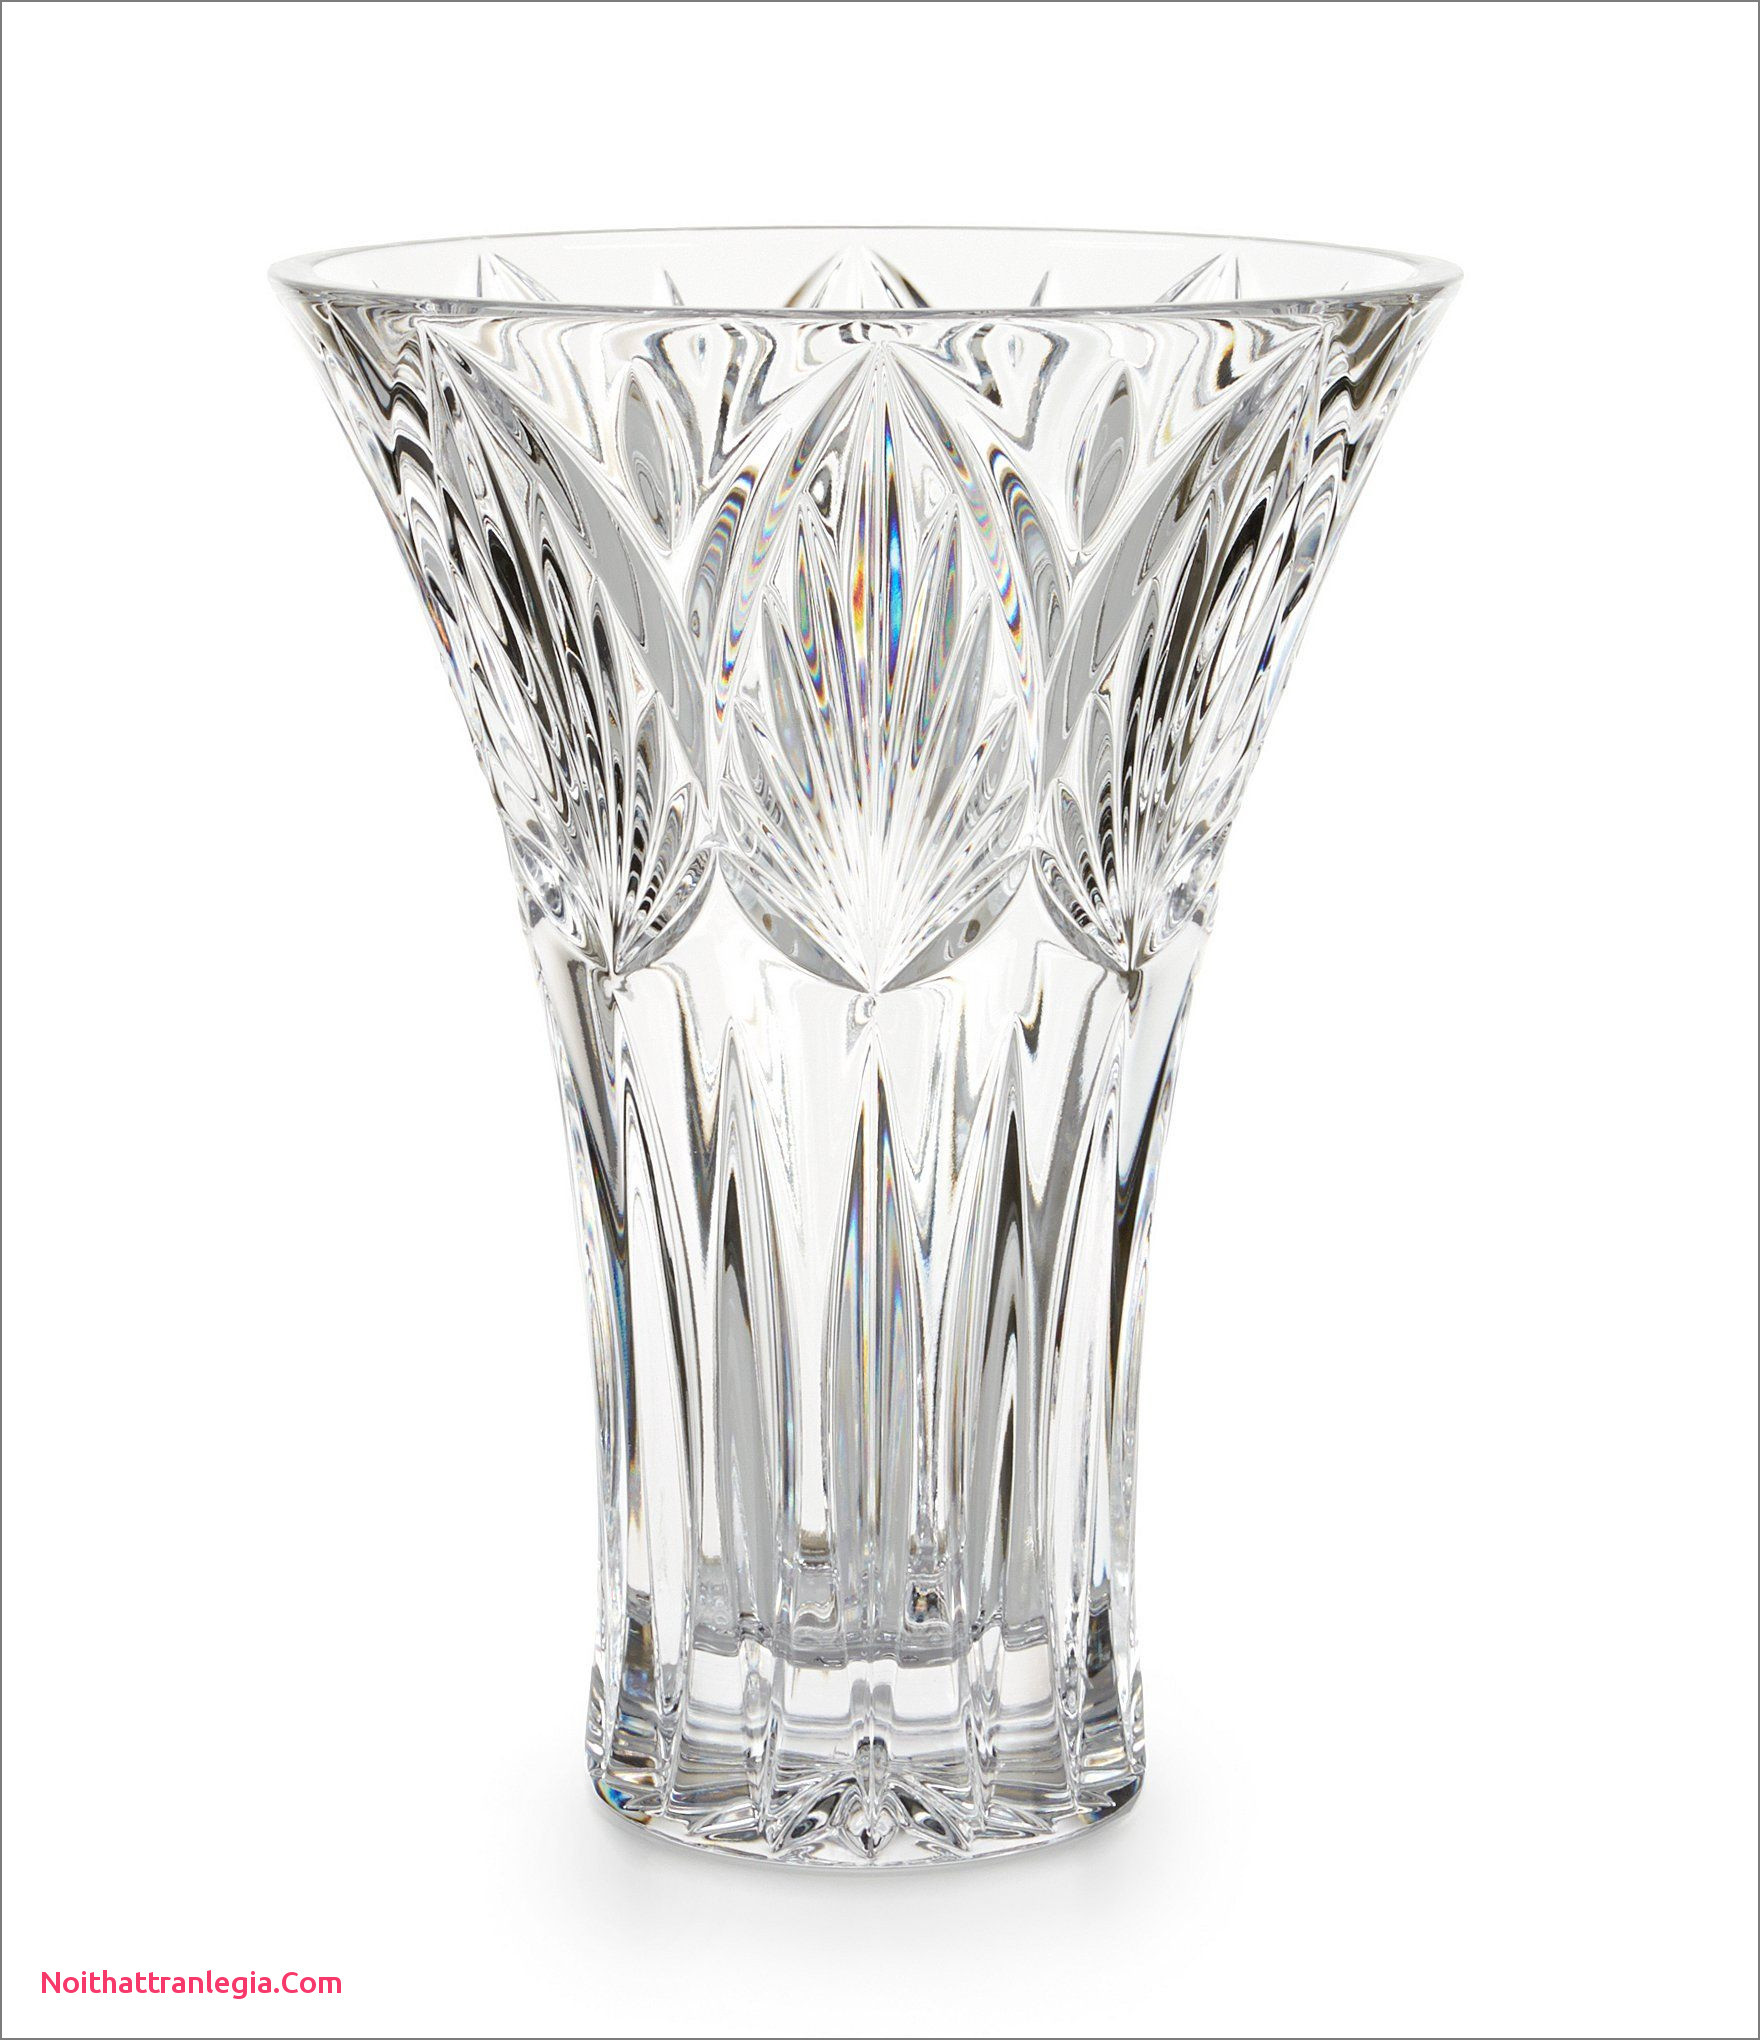 19 Ideal 24 Inch Tall Glass Vases 2024 free download 24 inch tall glass vases of 20 large waterford crystal vase noithattranlegia vases design within large waterford crystal vase best of waterford westbridge crystal vase of large waterford cry